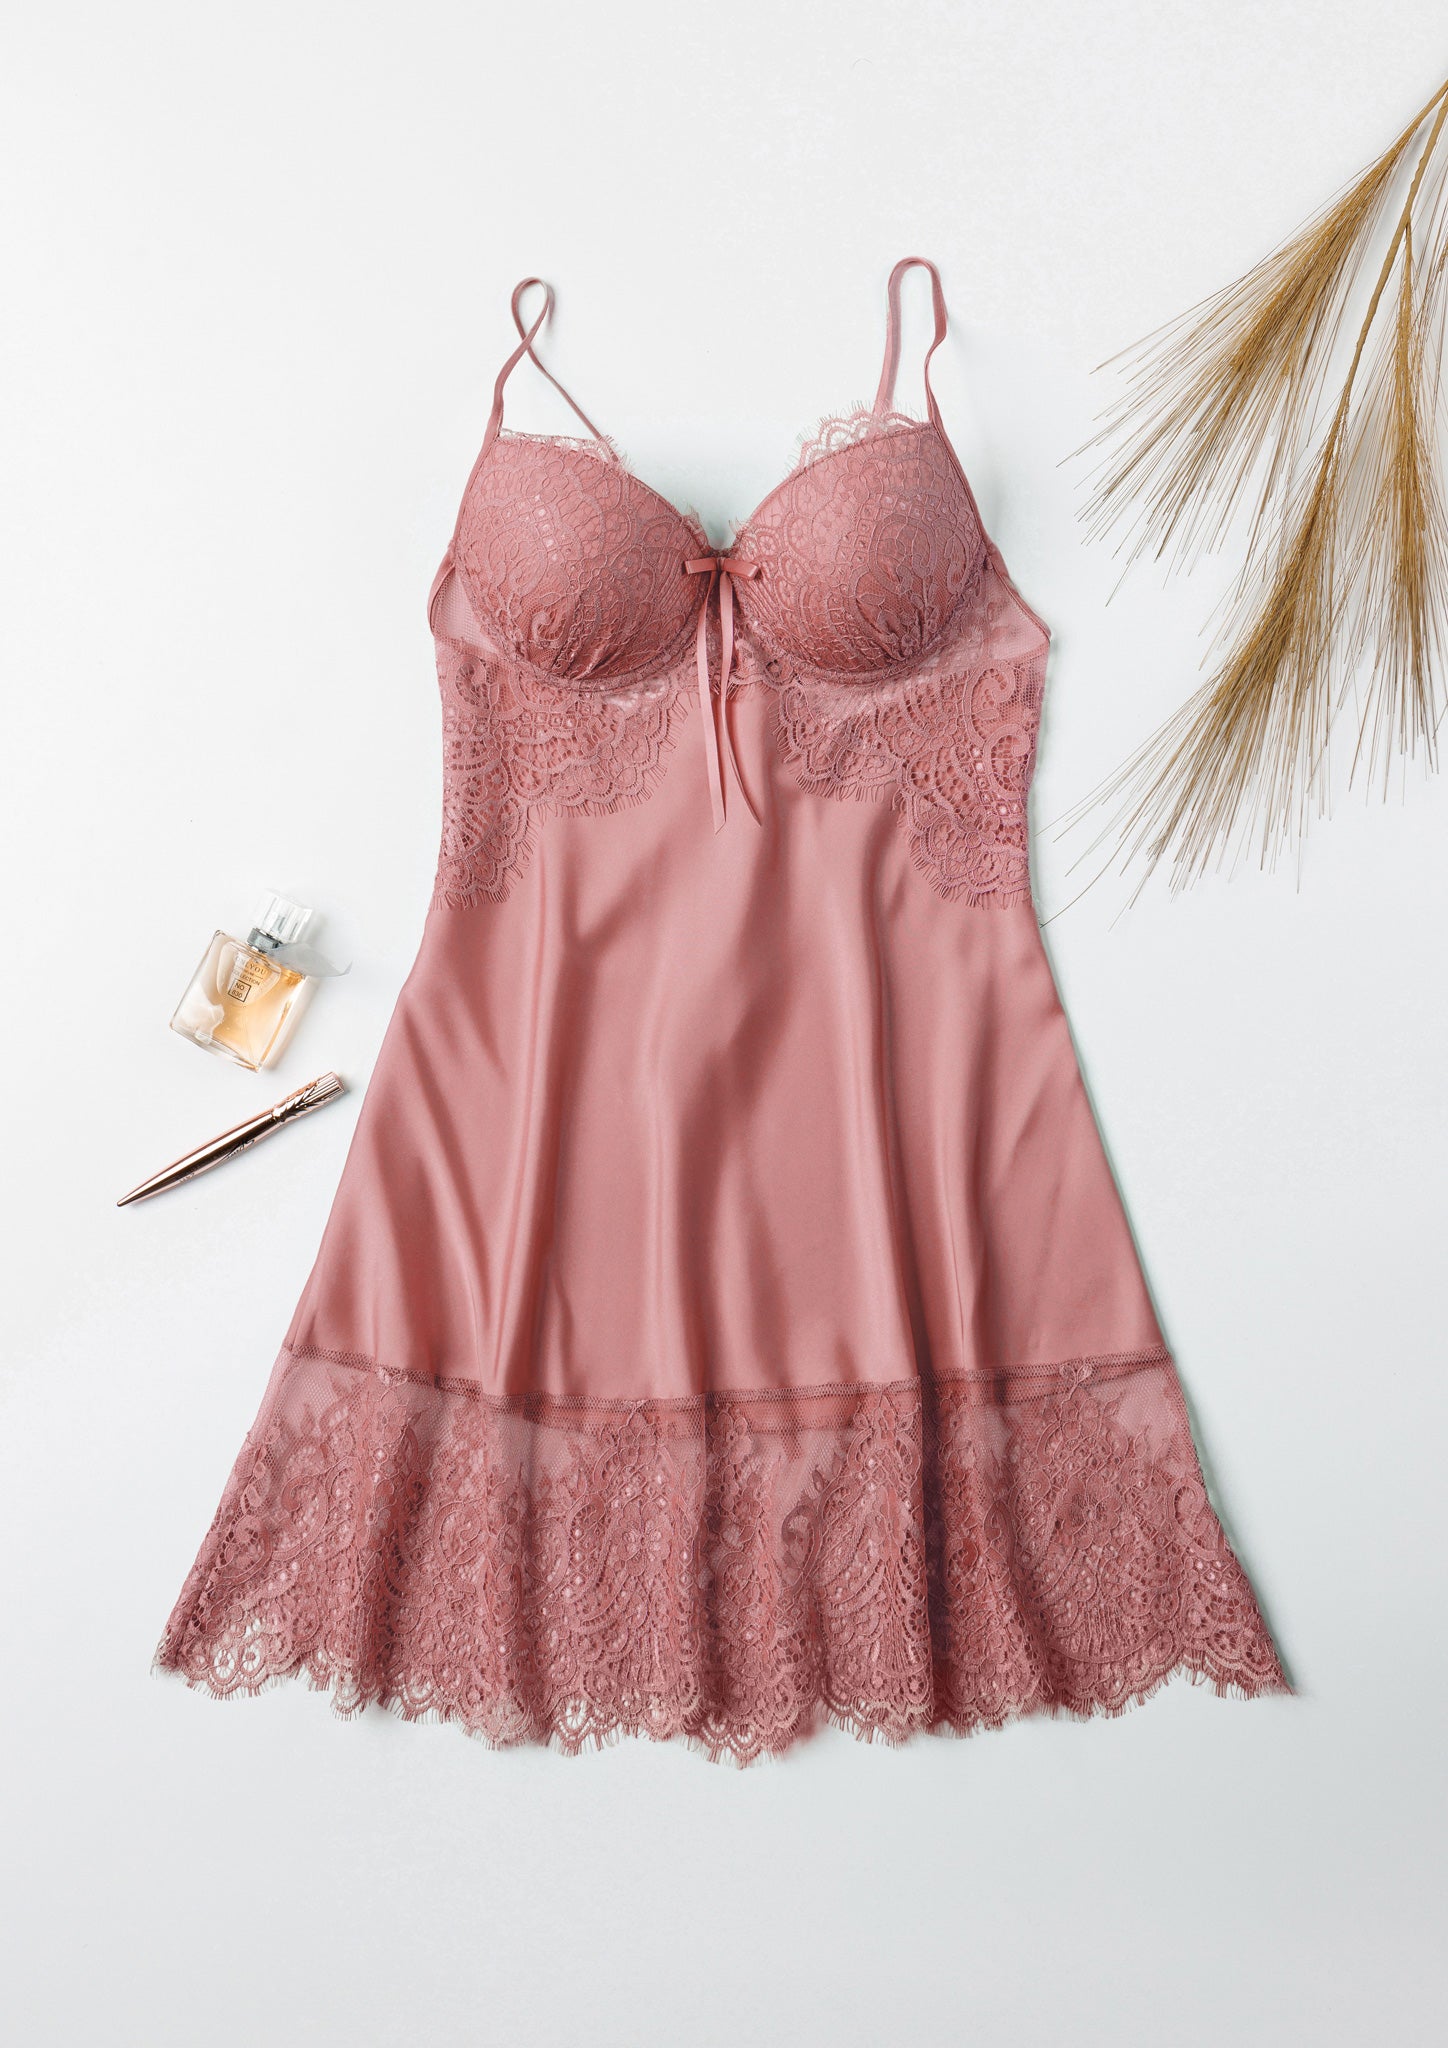 Satin Lace Babydoll rose brown color. 